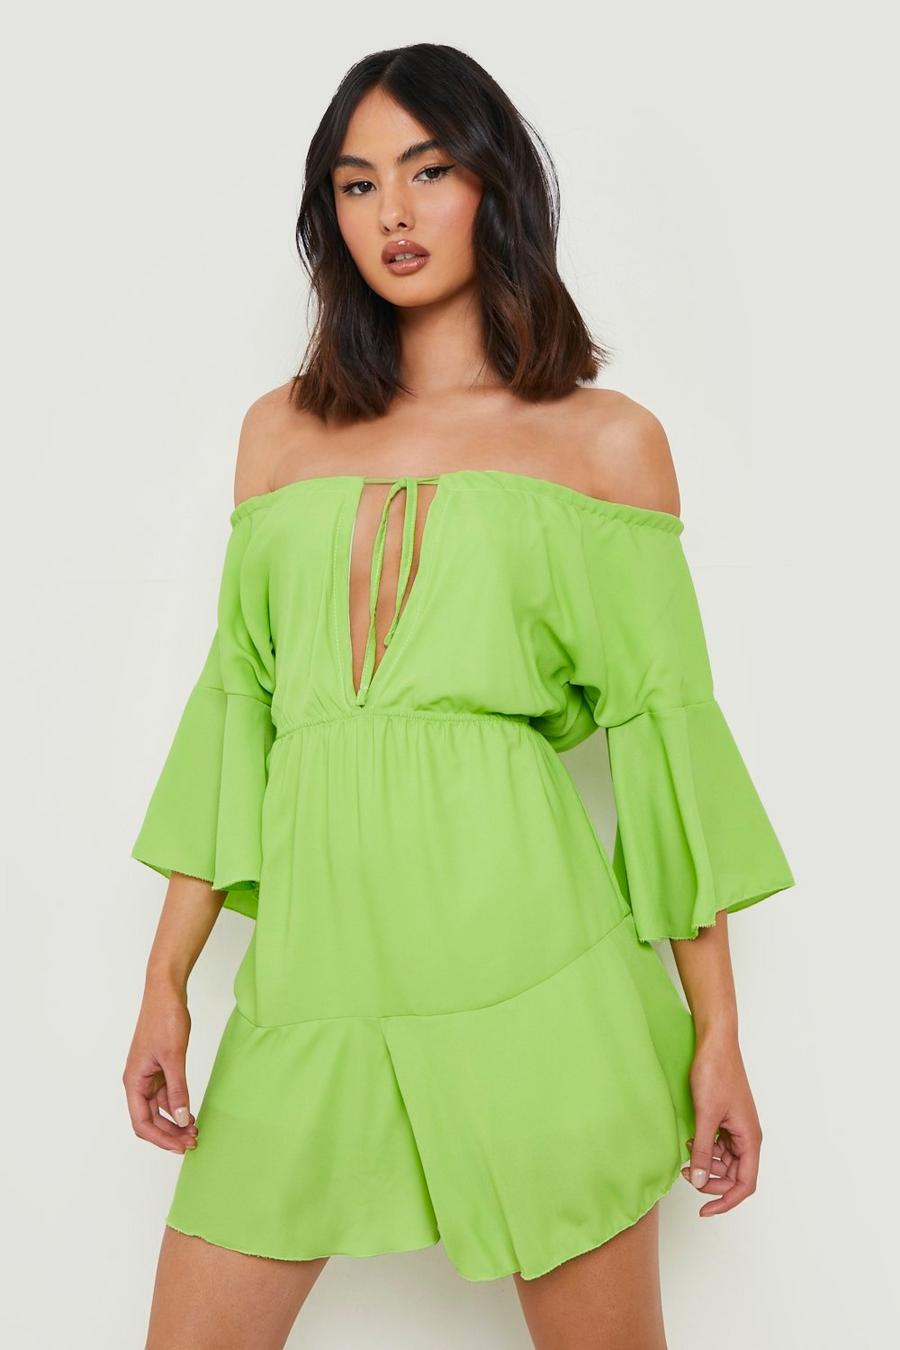 Chartreuse Chiffon Off The Shoulder Flare Romper